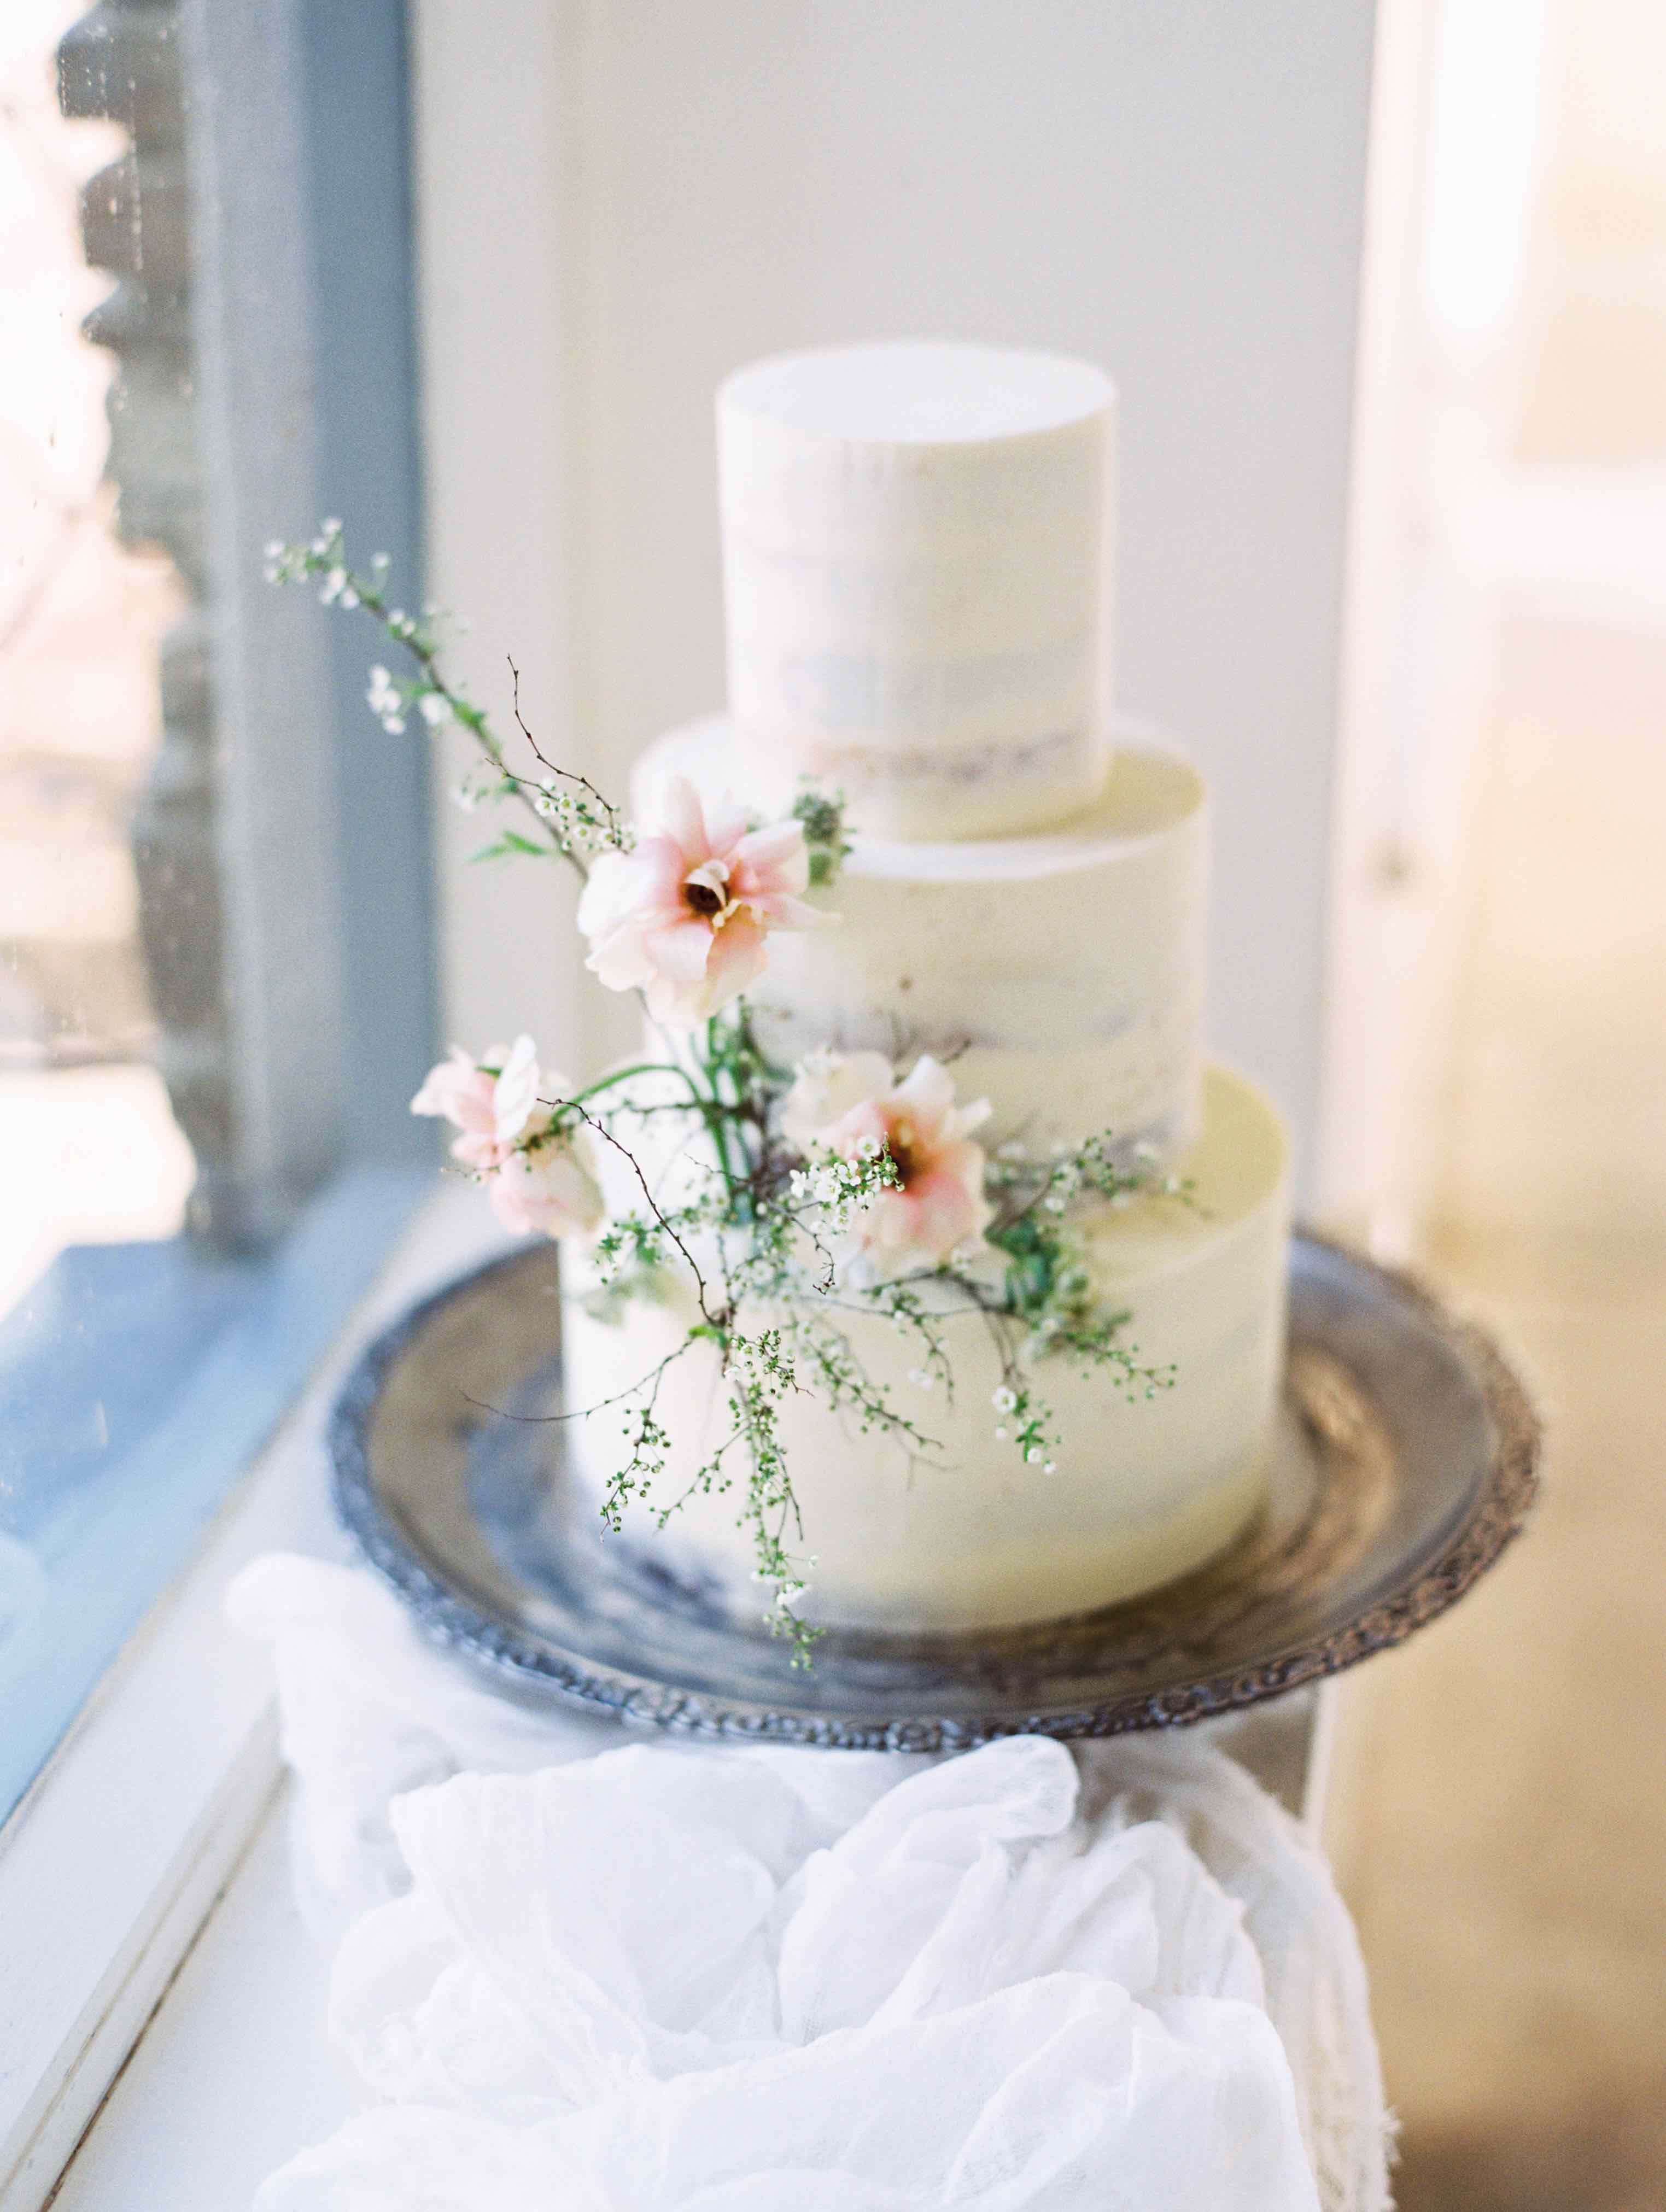 Gentle, delicate Spring flowers on a semi-naked buttercream wedding cake